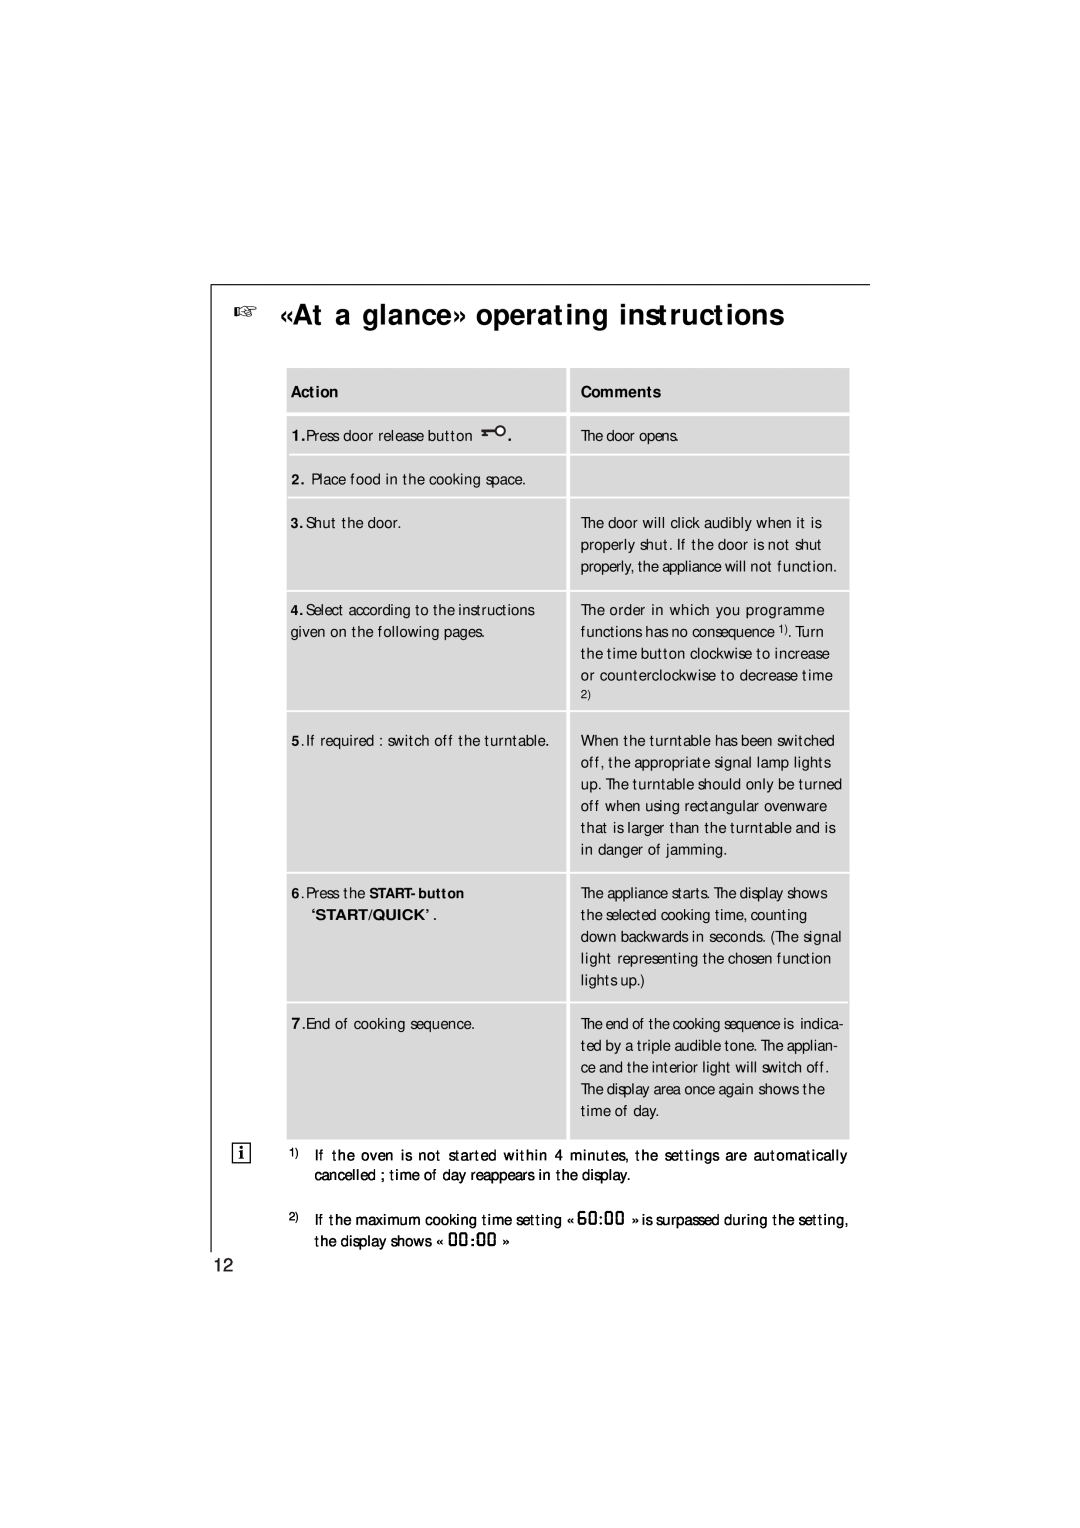 AEG 153 E manual «At a glance» operating instructions, Action, Comments, Press the START-button 